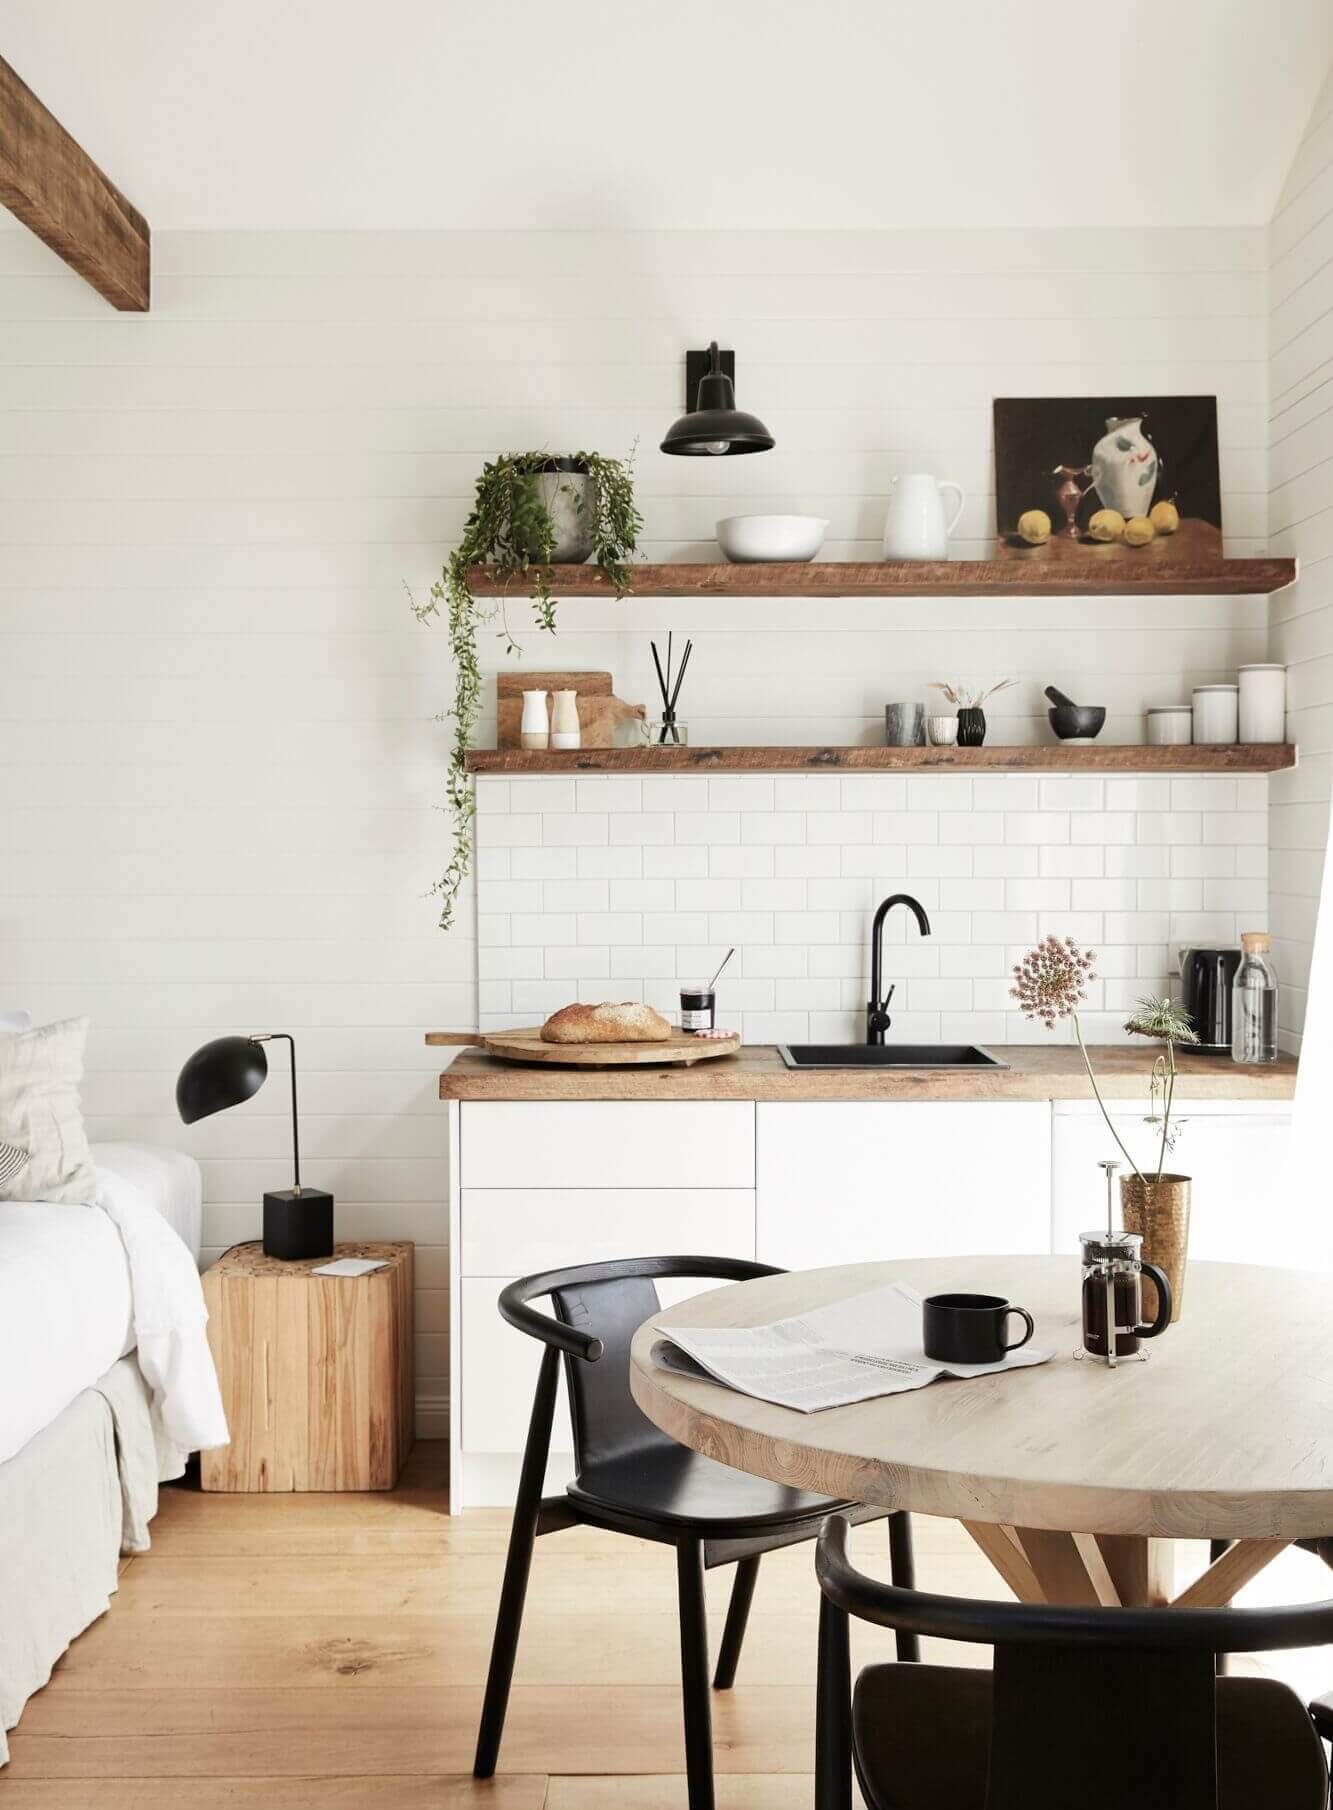 Kitchenette at The Bower Barn, The Bower Byron Bay